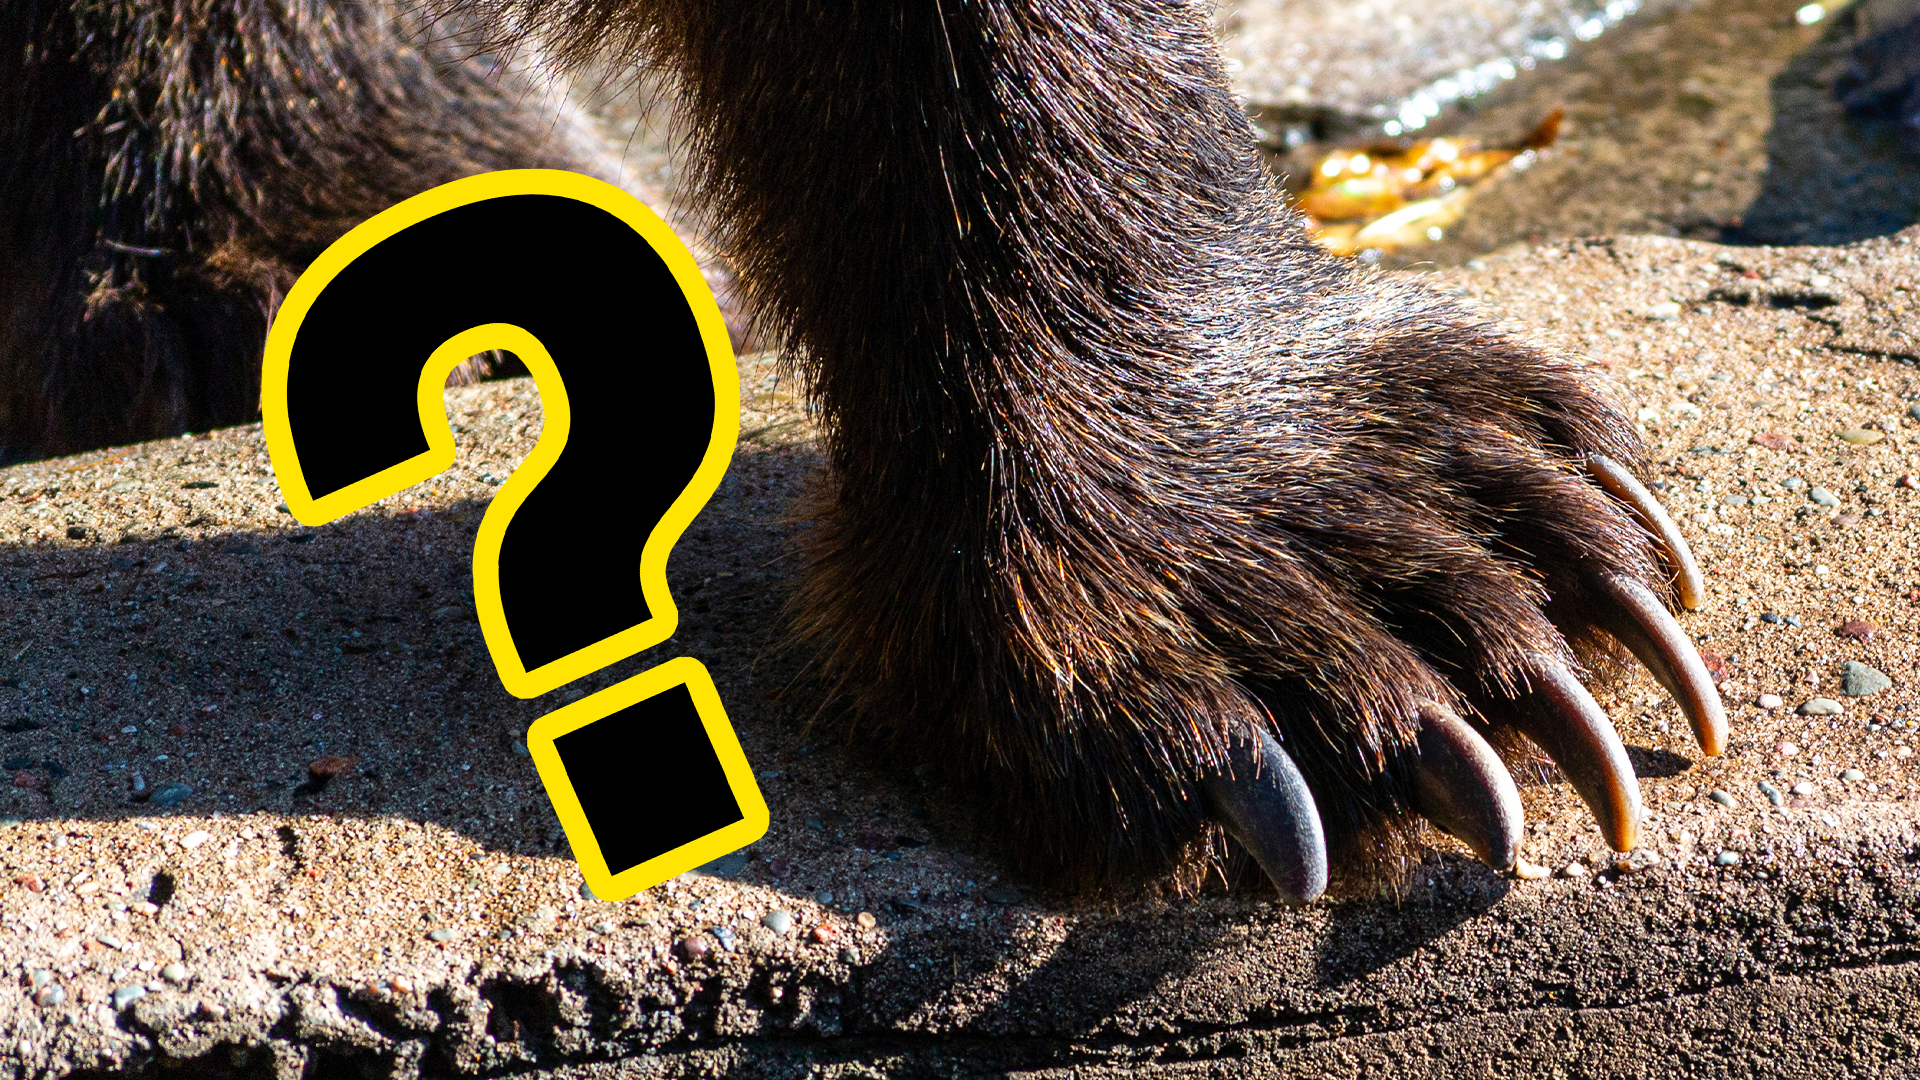 A hairy paw and a question mark